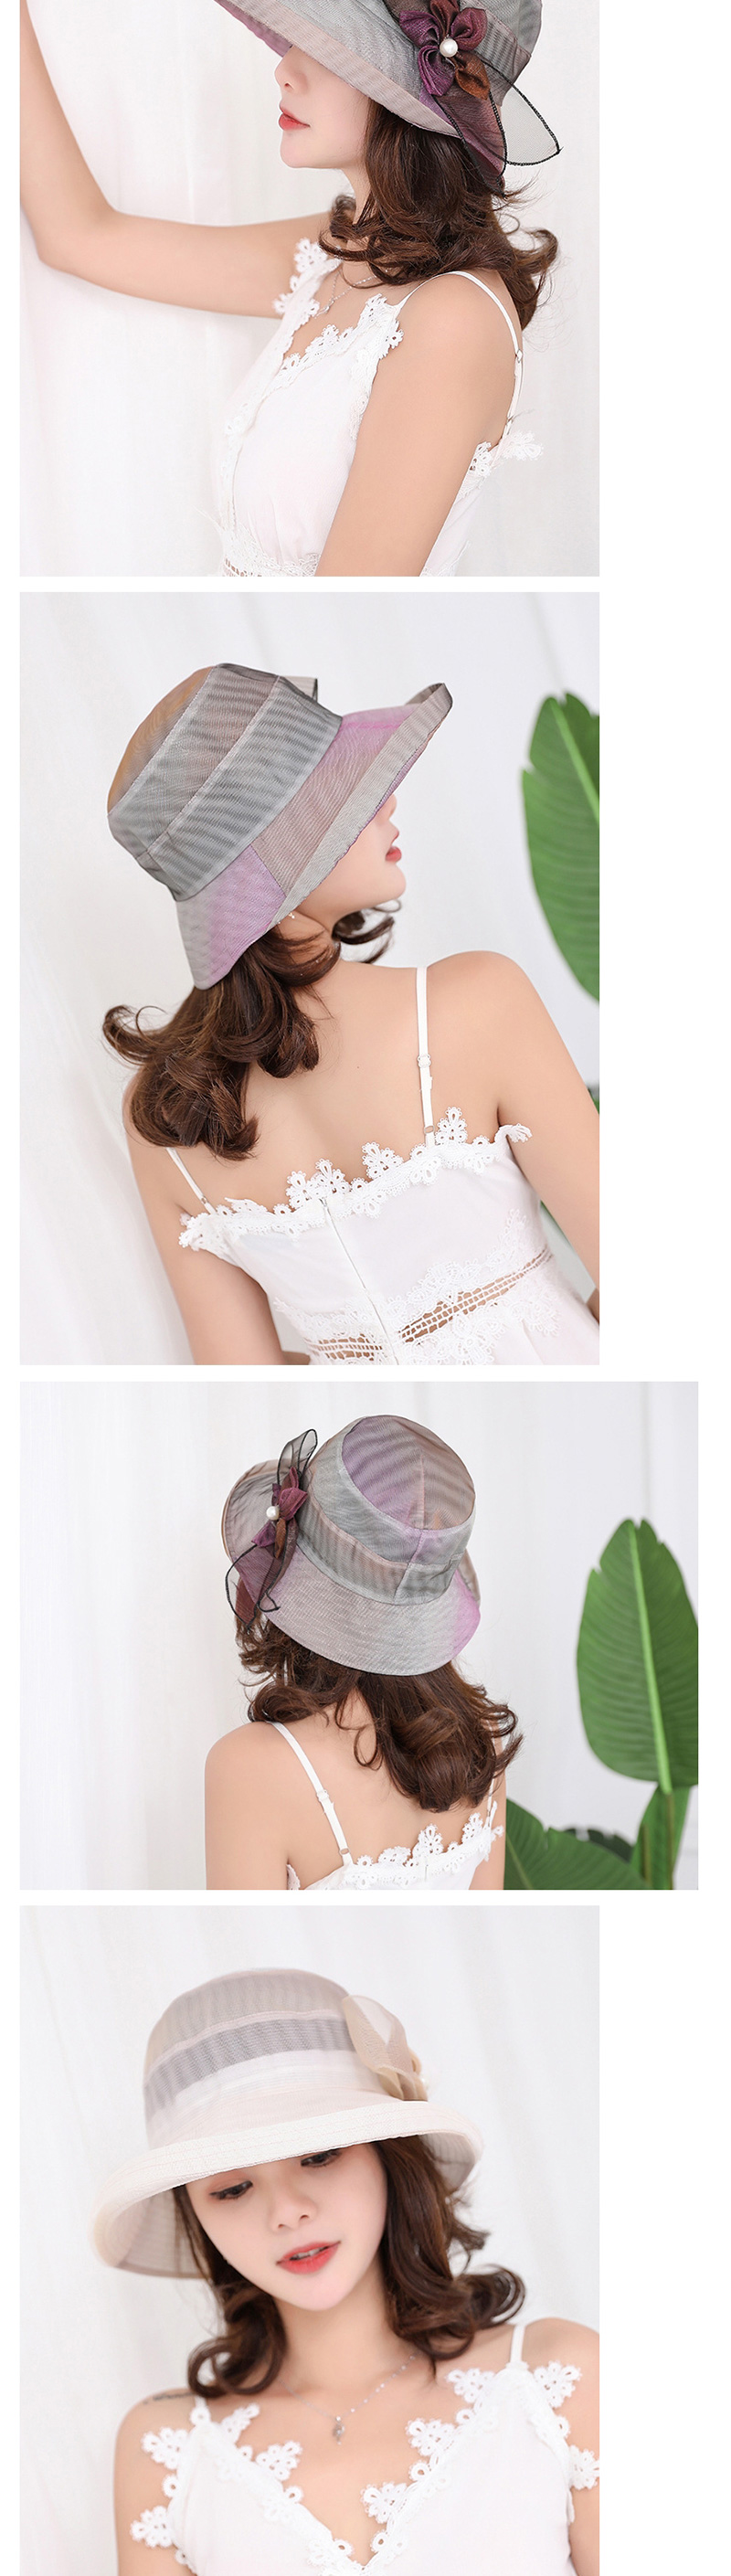 Fashion 9540 Skin Red Bow-knit Pearl Mesh Contrast Hat,Sun Hats